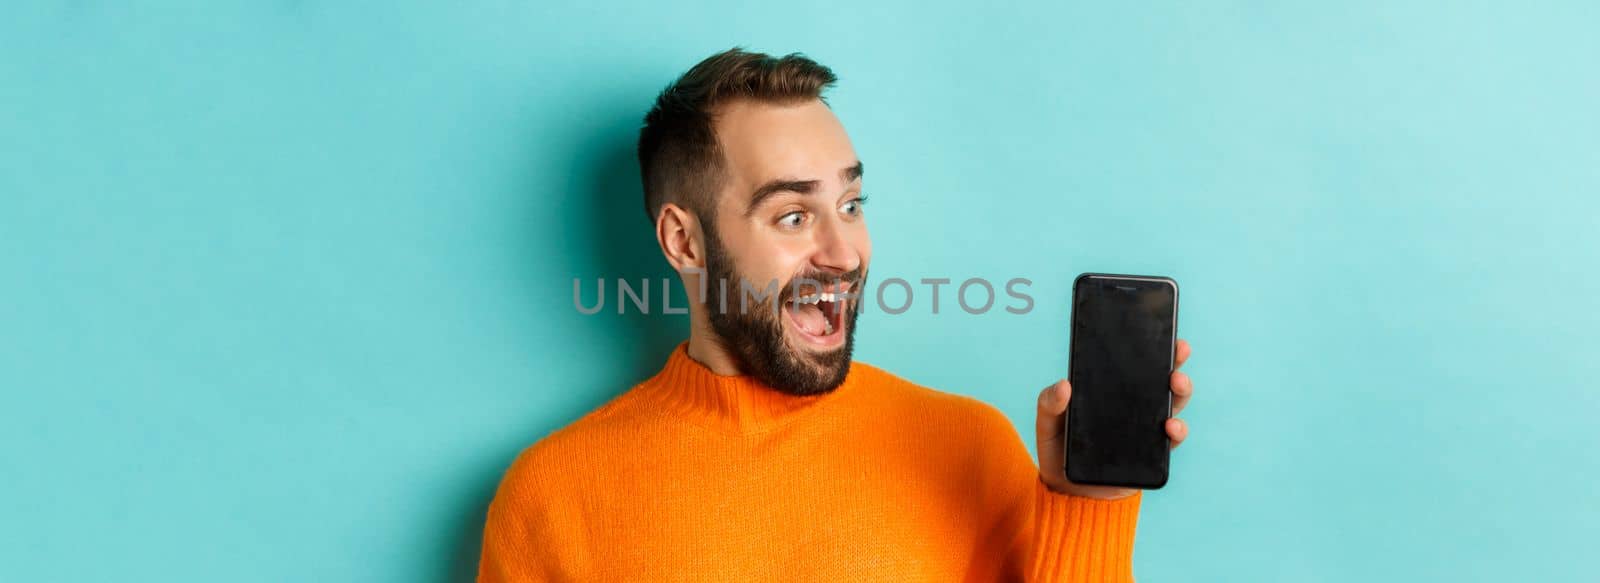 Close-up of young bearded man showing phone screen and looking amazed, wearing orange sweater, standing against studio background.